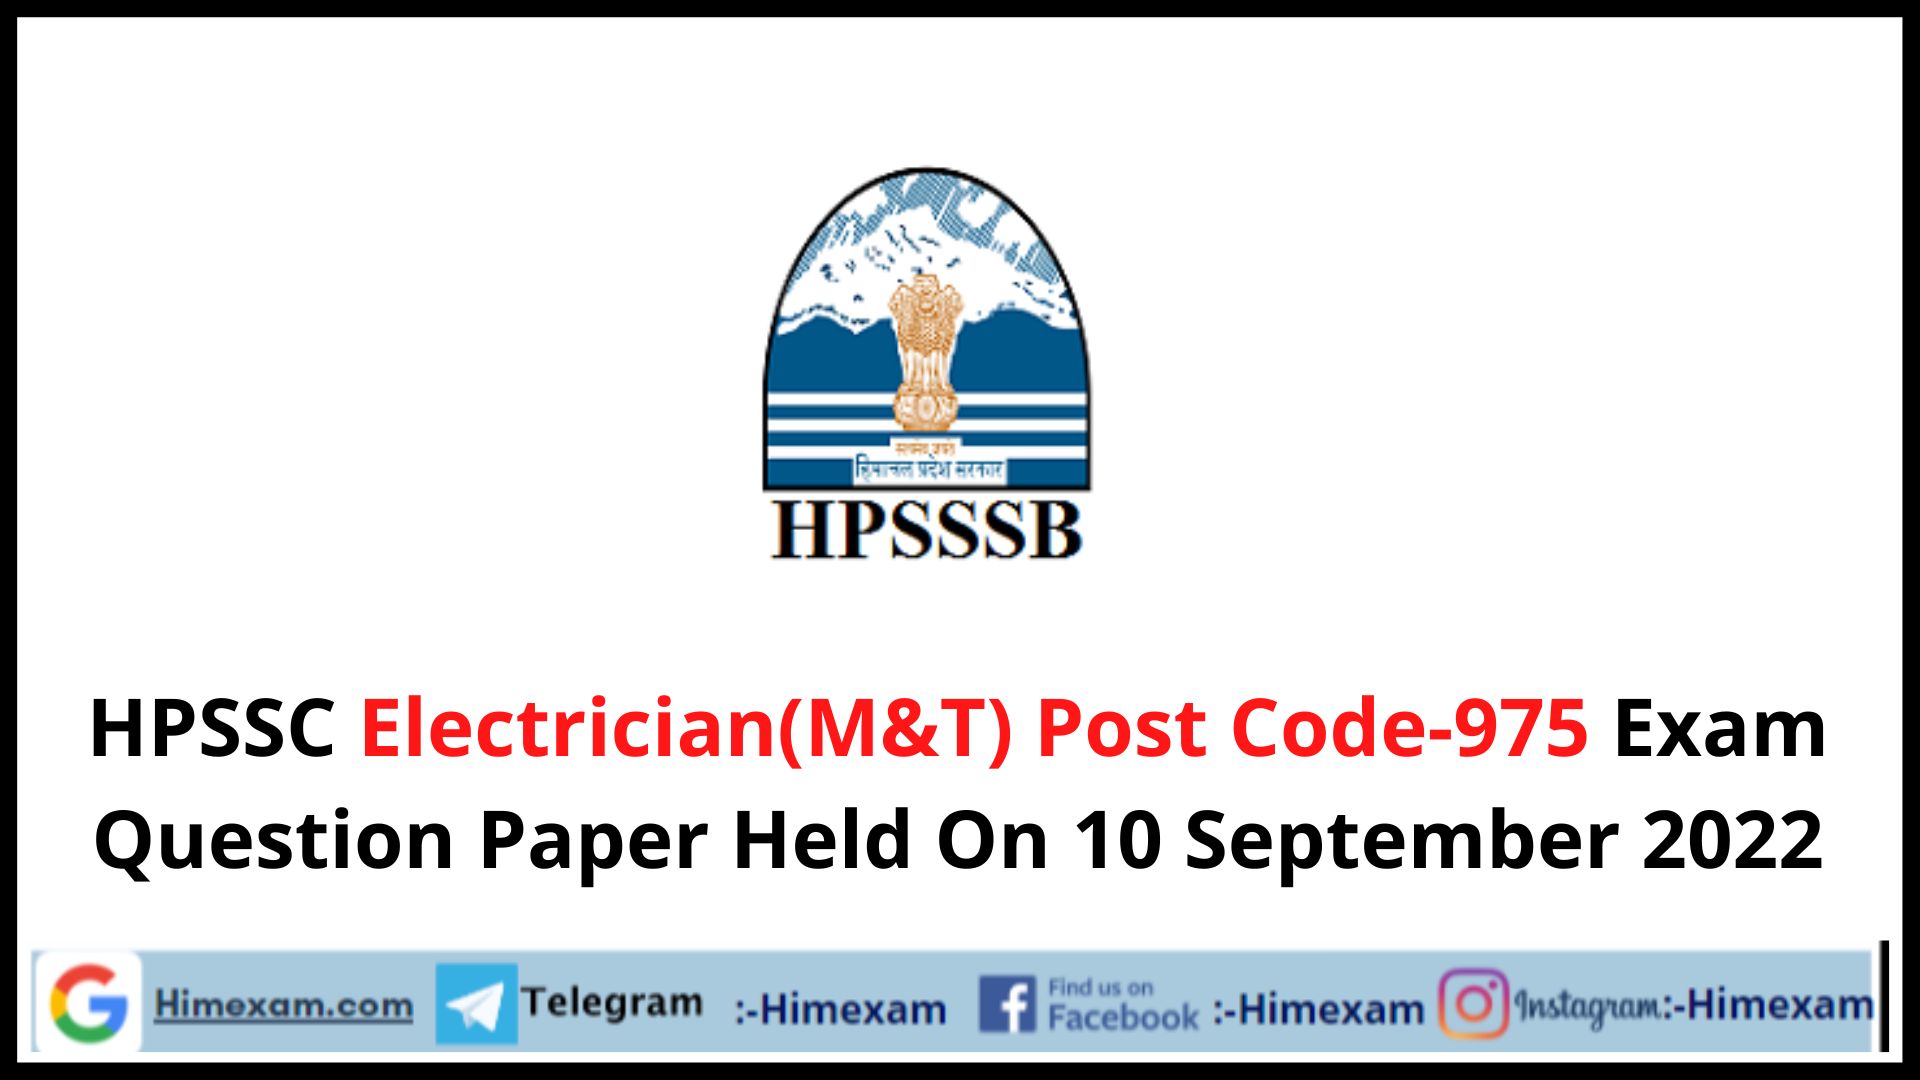 HPSSC Electrician(M&T) Post Code-975 Exam Question Paper Held On 10 September 2022